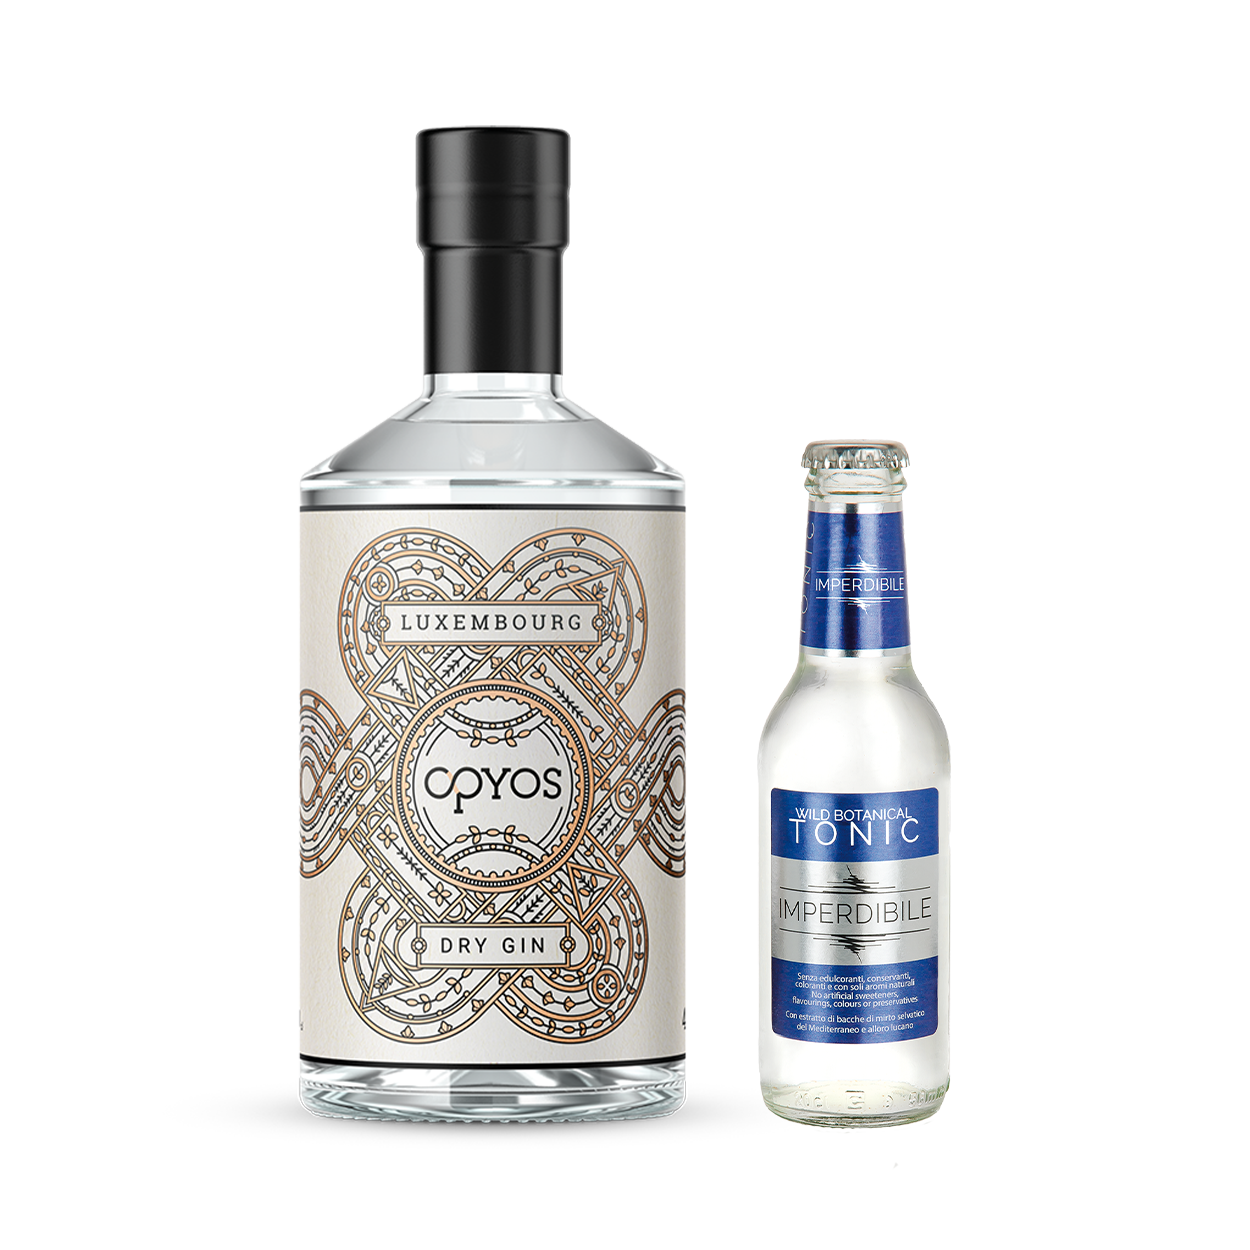 Luxembourg Dry Gin